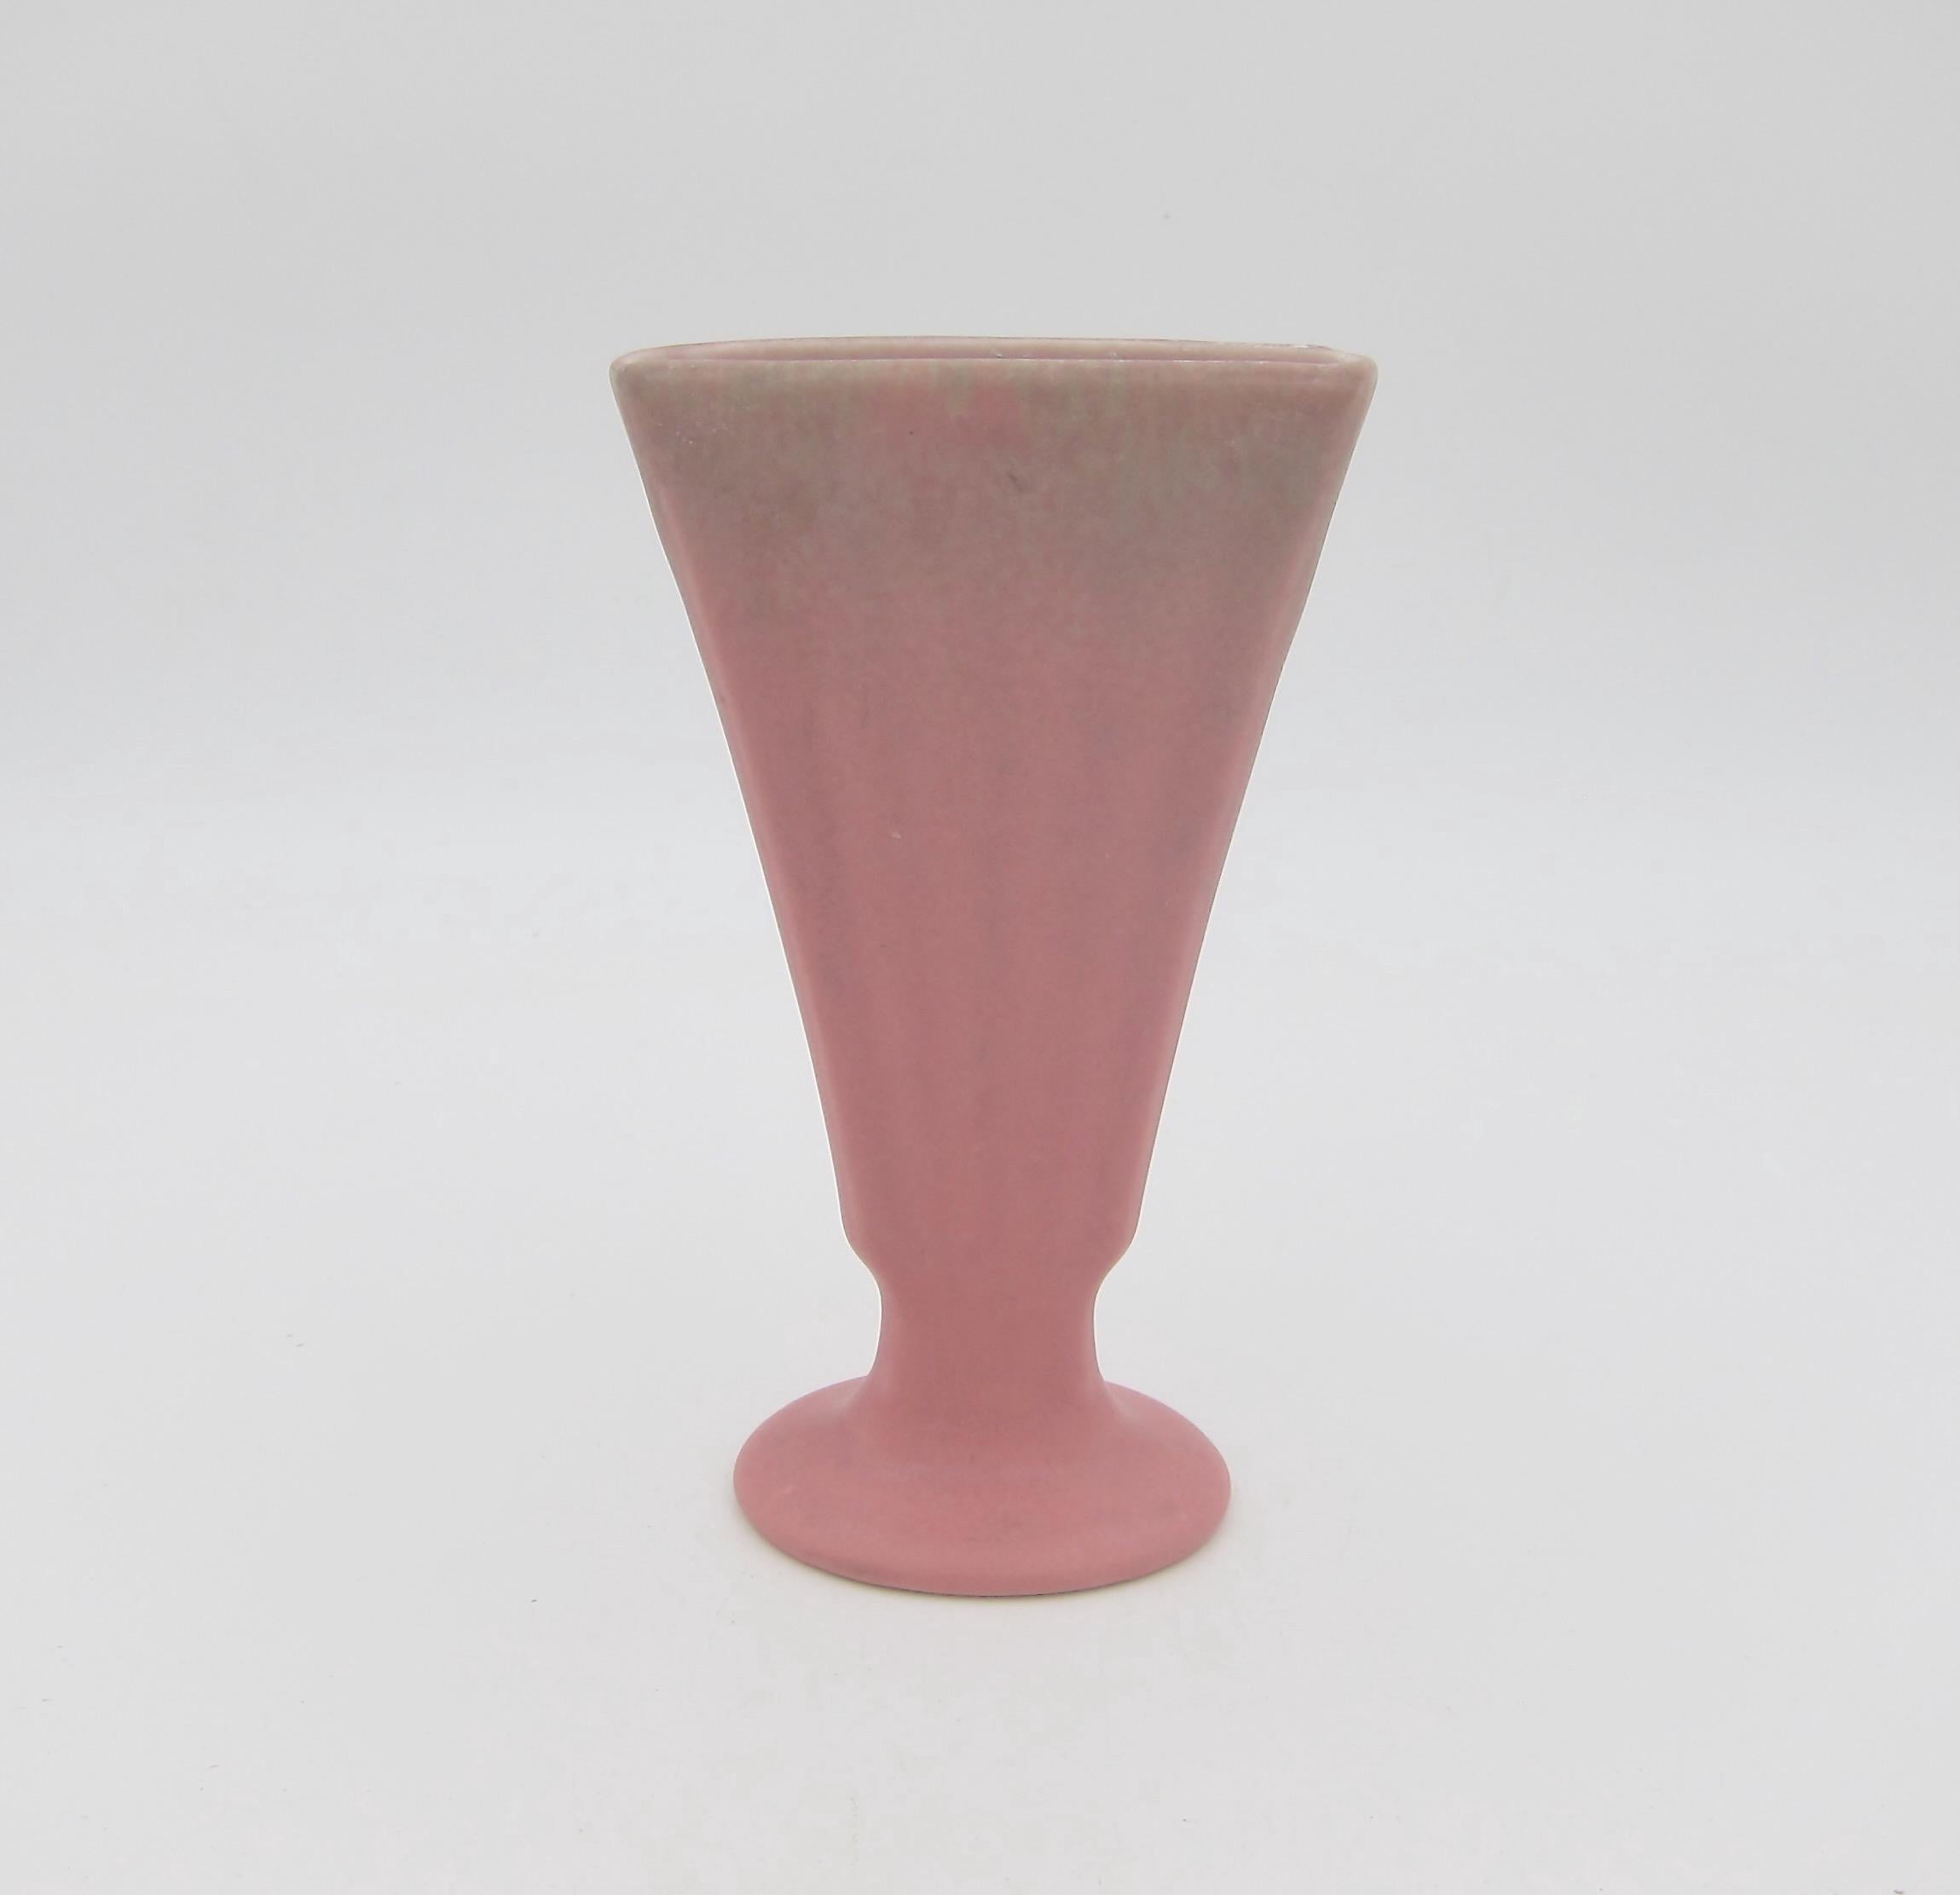 An American Rookwood Pottery production vase date marked for 1927. The American art pottery vase flares outward in a fan shape with subtle ribbed detailing resting atop an oval foot. The vessel's matte glaze is a velvety dusty rose-pink with mottled